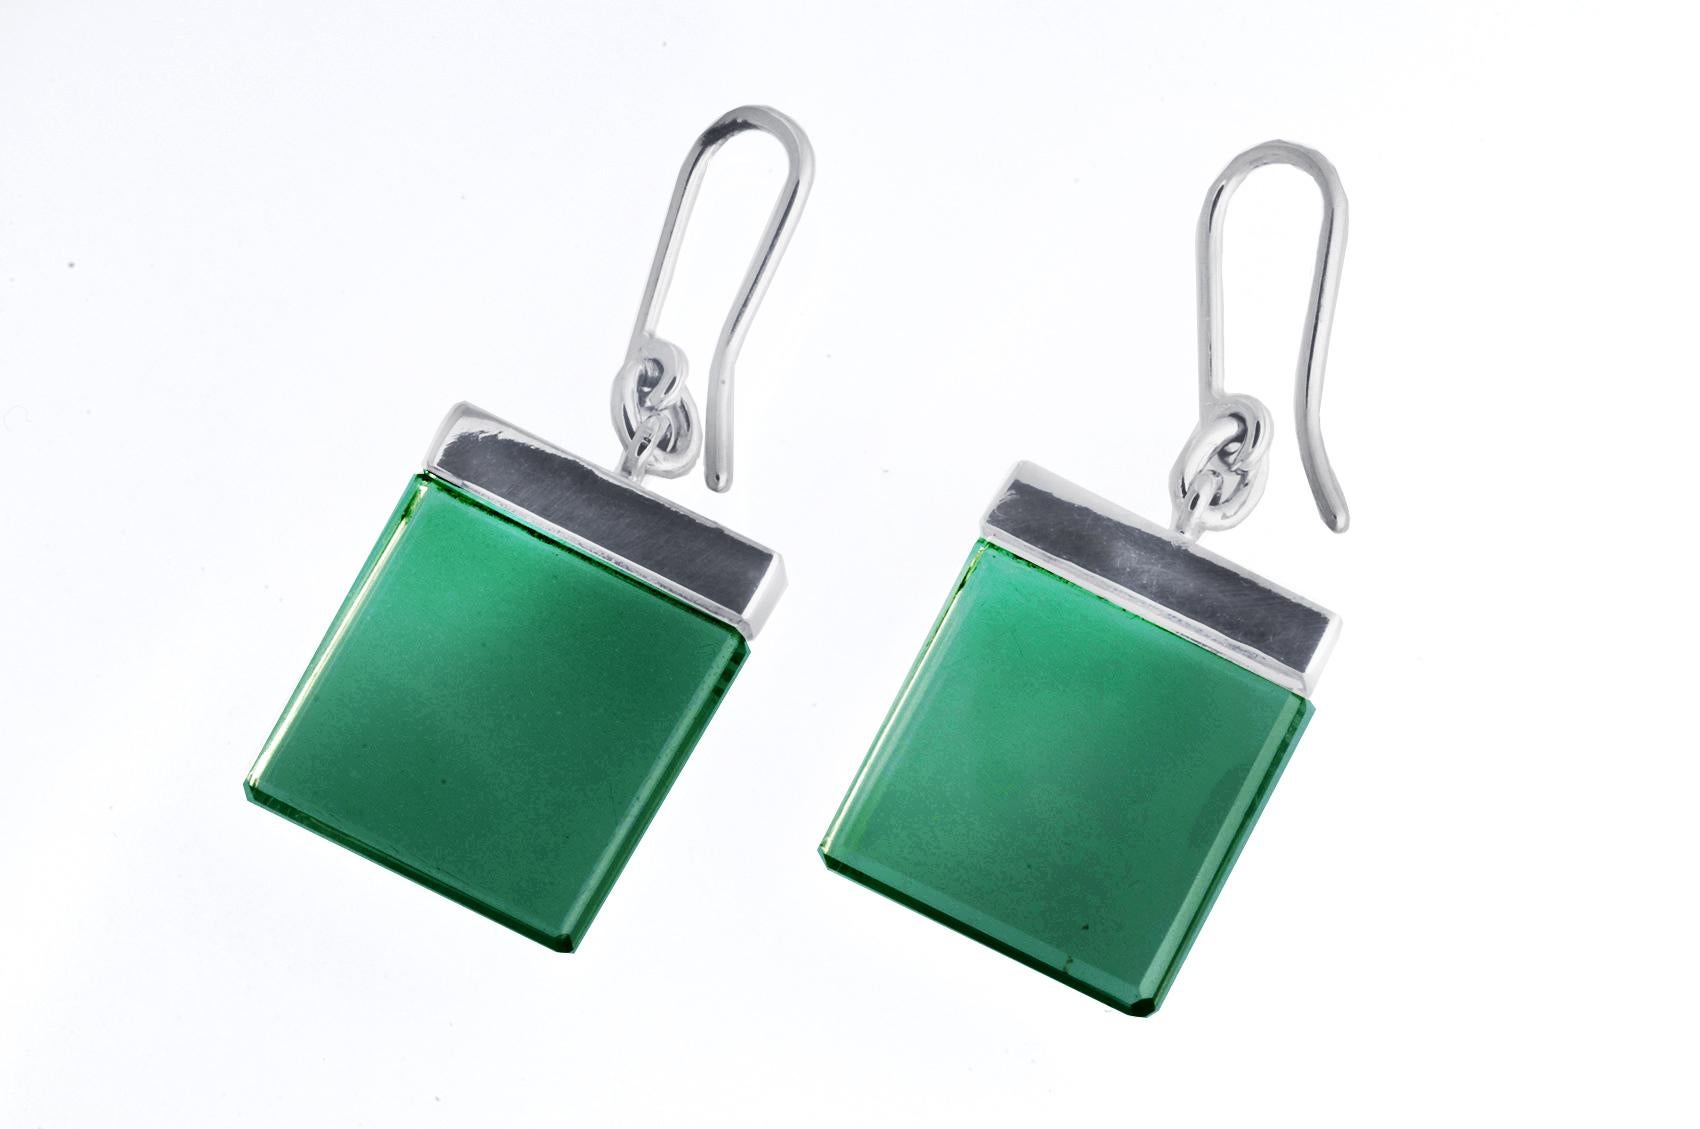 This jewellery collection, designed as sculptures by oil painter Polya Medvedeva from Berlin, was featured in Harper's Bazaar UA and Vogue UA publications.

These earrings are made of 18 karat white gold and feature dark green grown quartzes